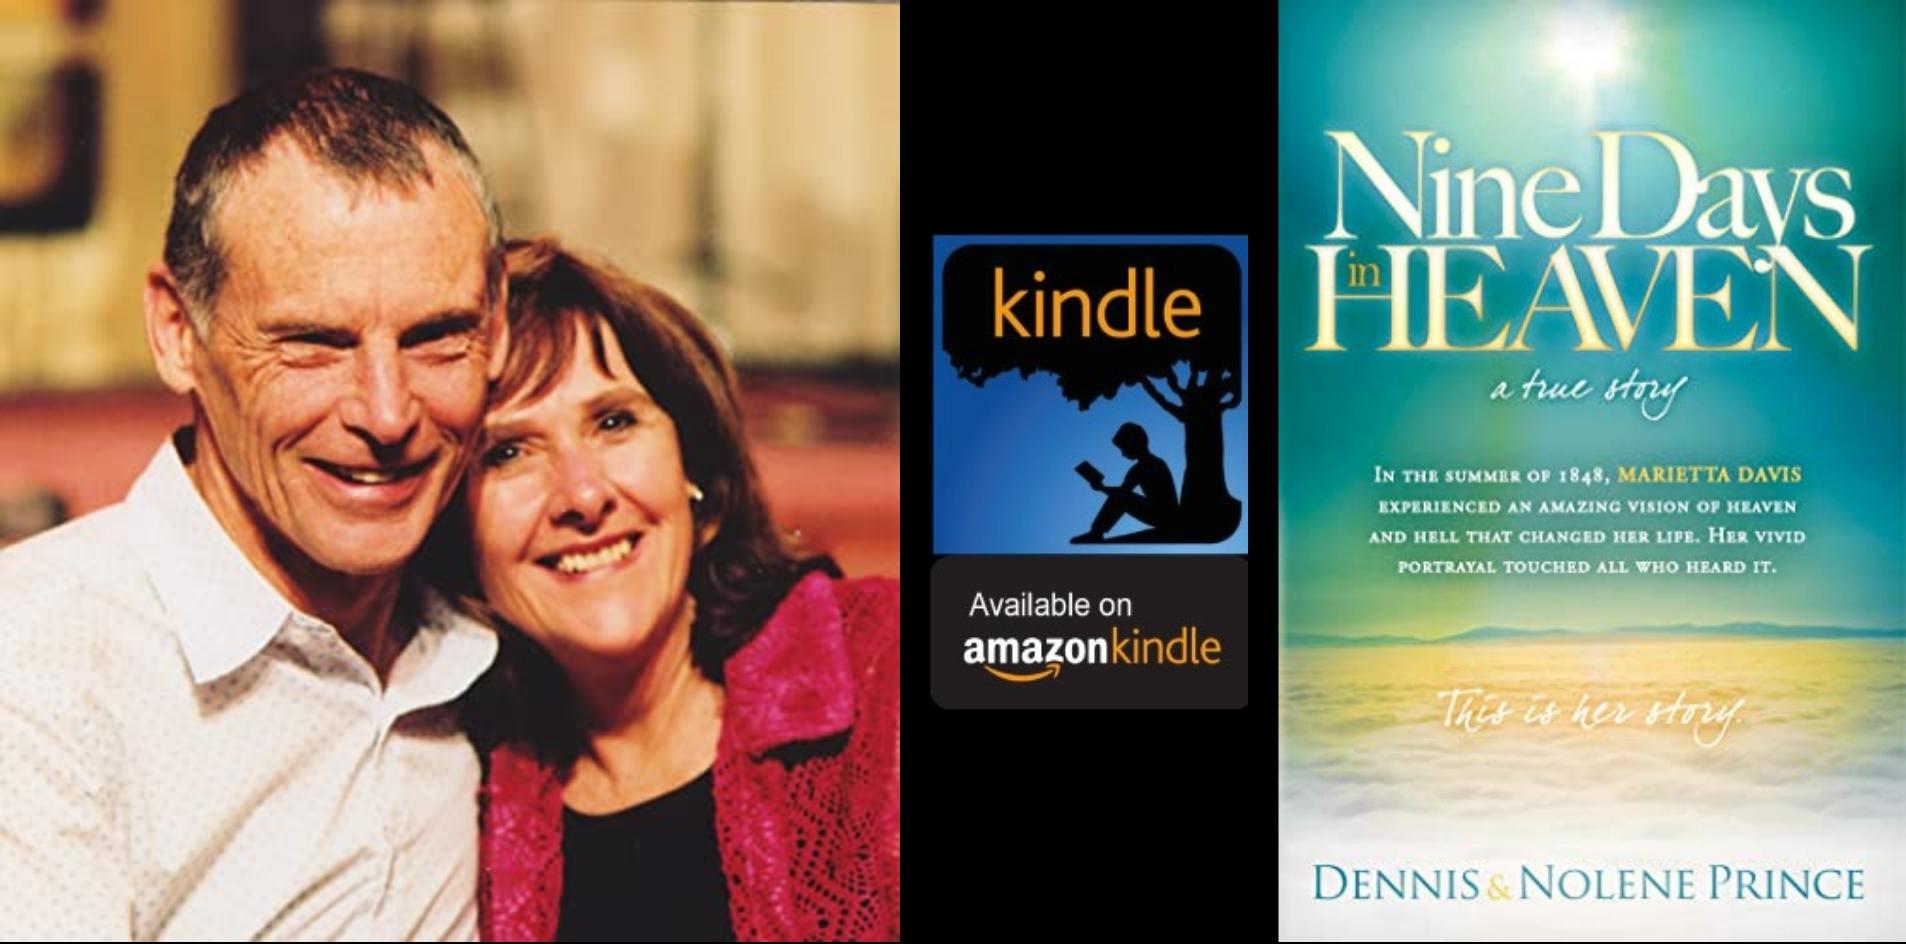 Amazon Kindle- H&S Magazine's Recommended Book Of The Week- Nine Days in Heaven, A True Story- By Dennis & Nolene Prince